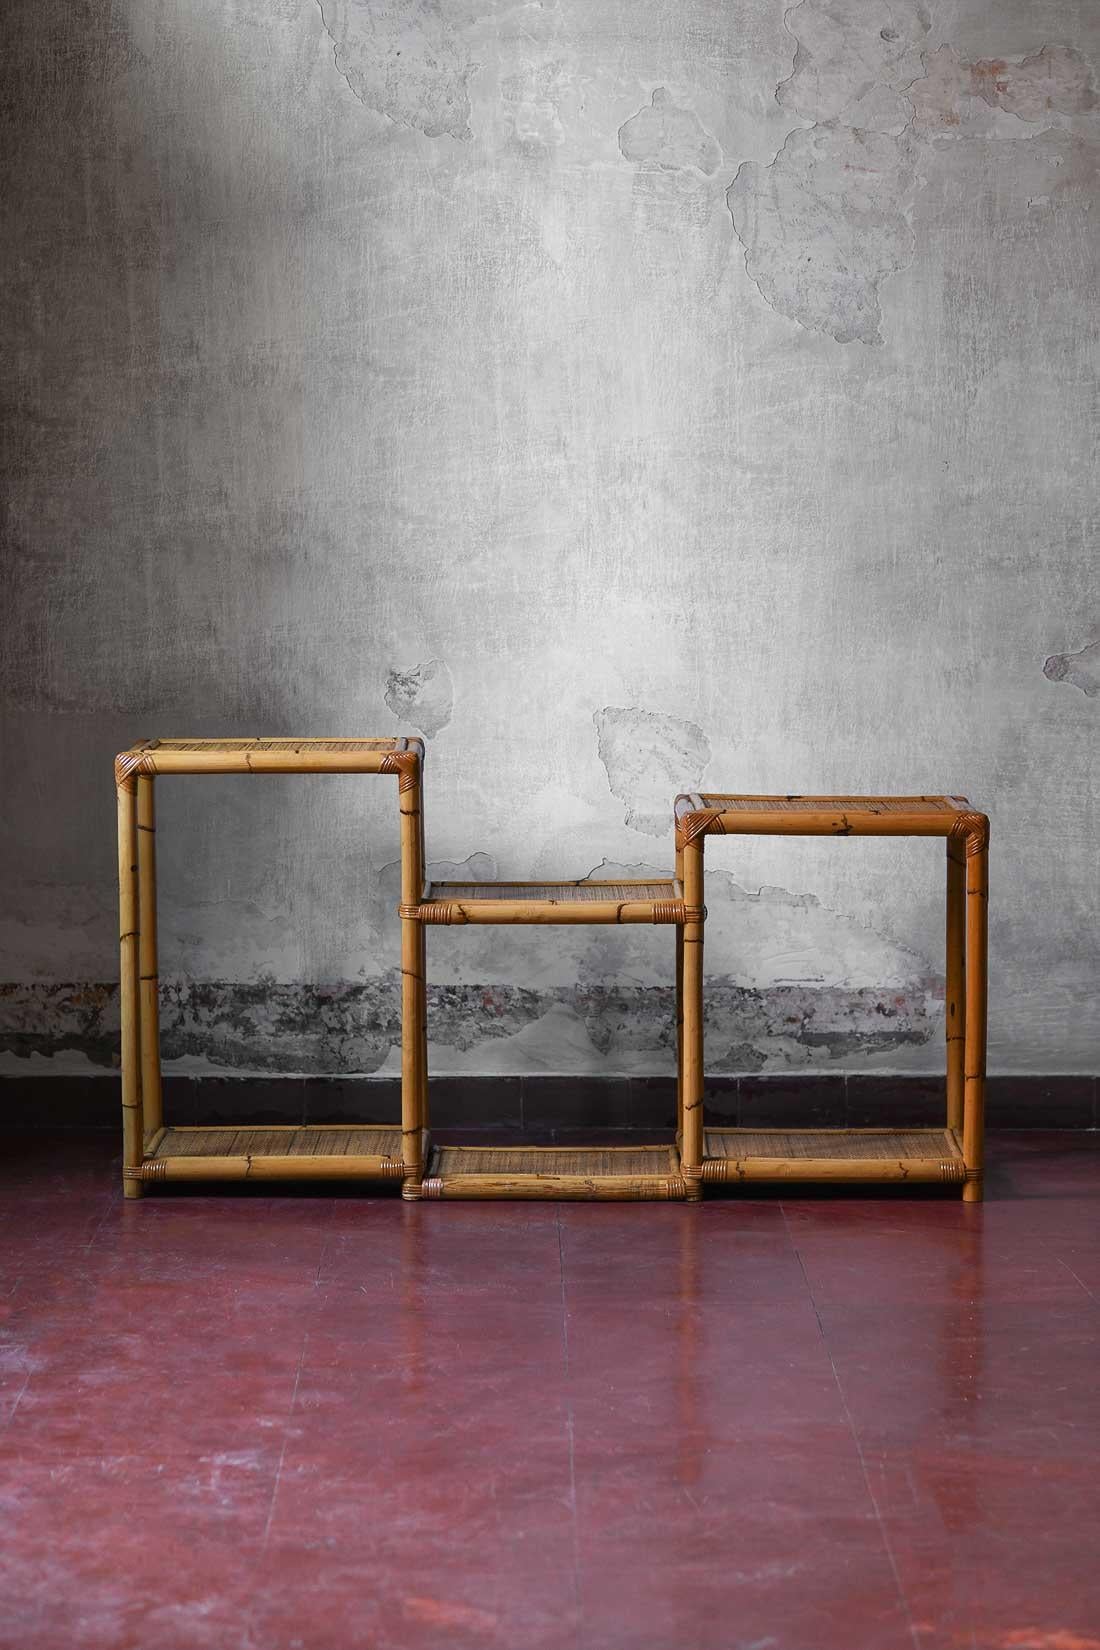 Three-high Étagère in rush and wicker, Italy 1980.
Product details
Dimensions: 144 W x 75 H x 35 D cm